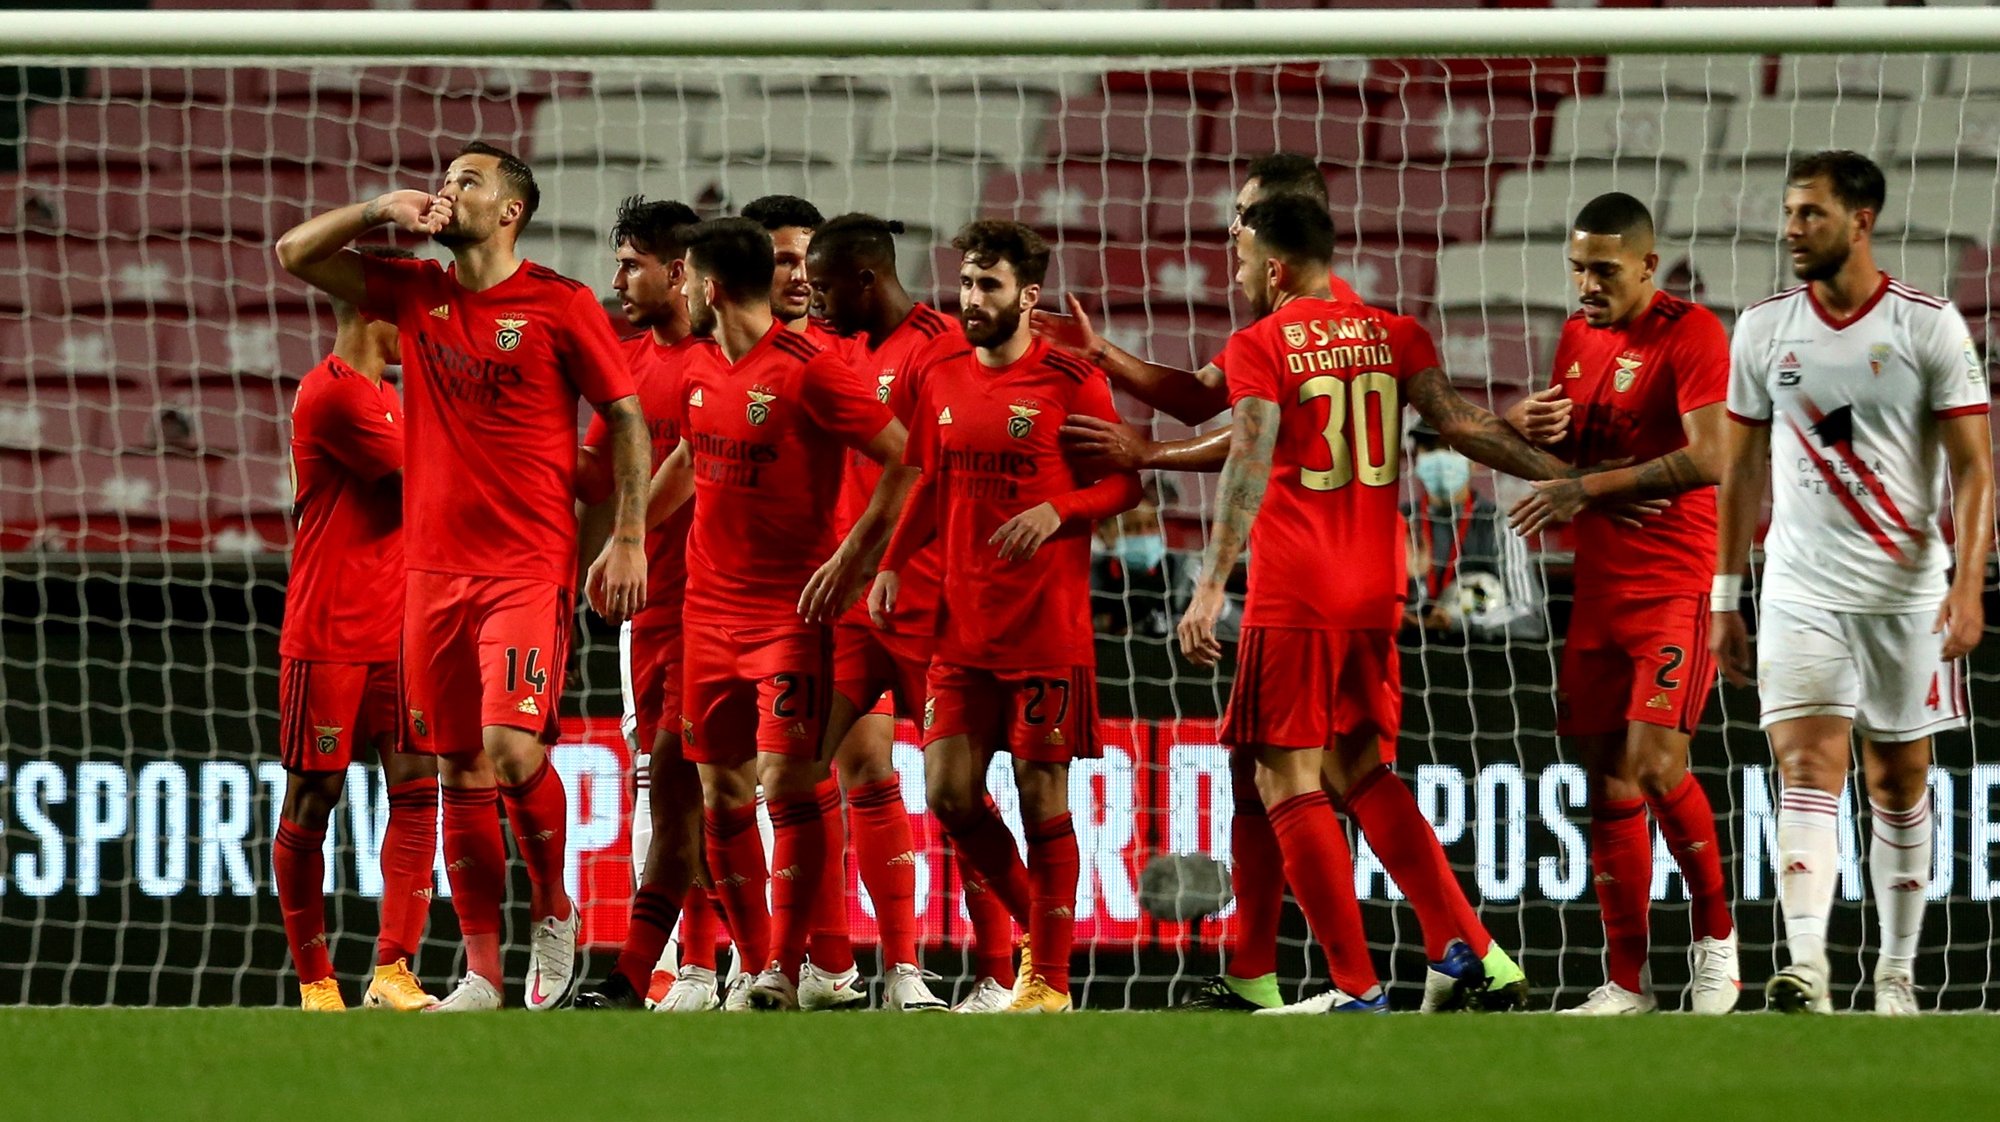 Benfica players celebrate after scoring a goal against Vilafranquense during  their 4th round of Portugal Cup soccer match held at Luz  stadium, in Lisbon, Portugal, 13th December 2020.  MANUEL DE ALMEIDA/LUSA